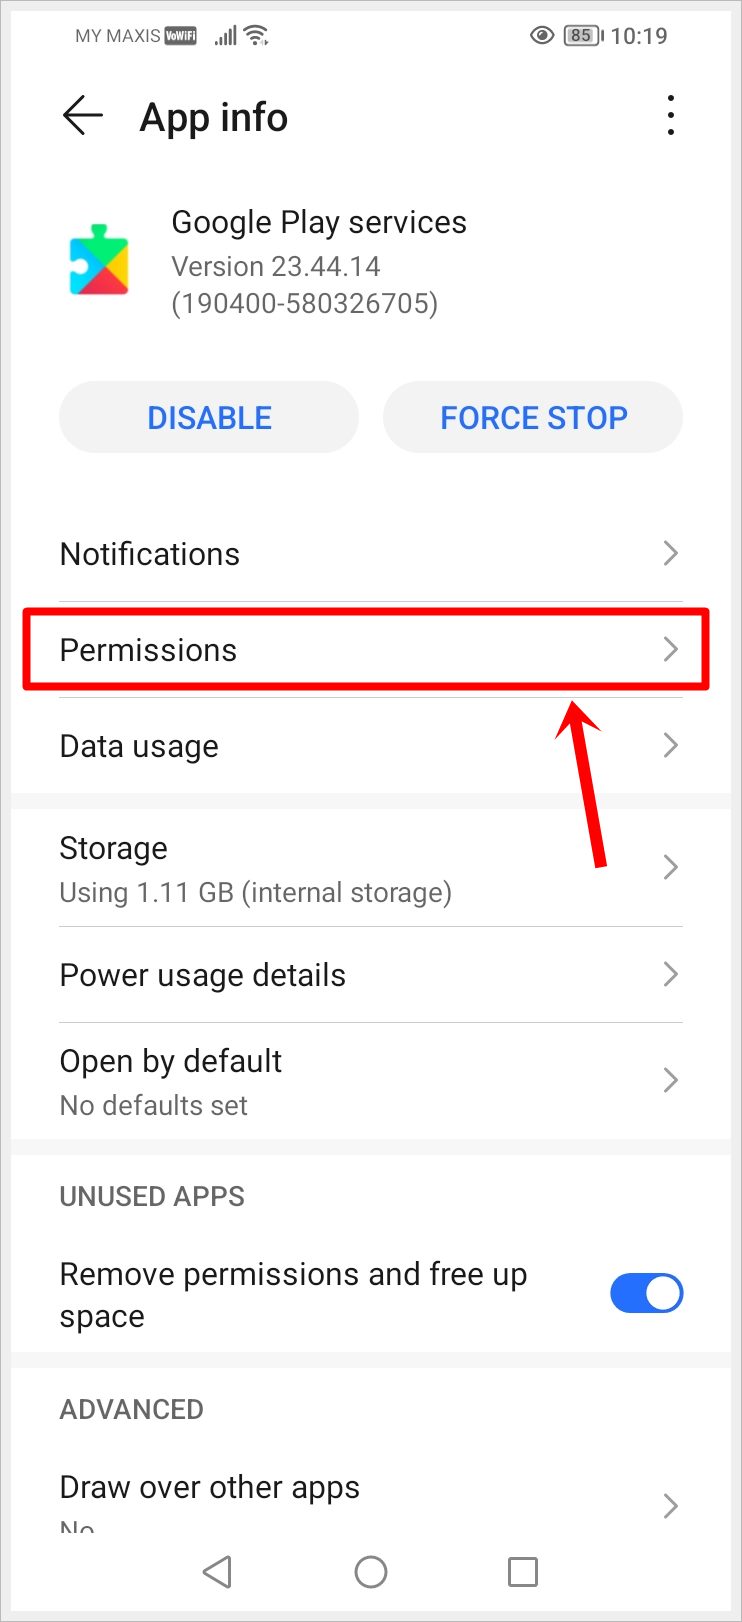 This image shows the Google Play Services App info page, with the "Permissions" option highlighted.